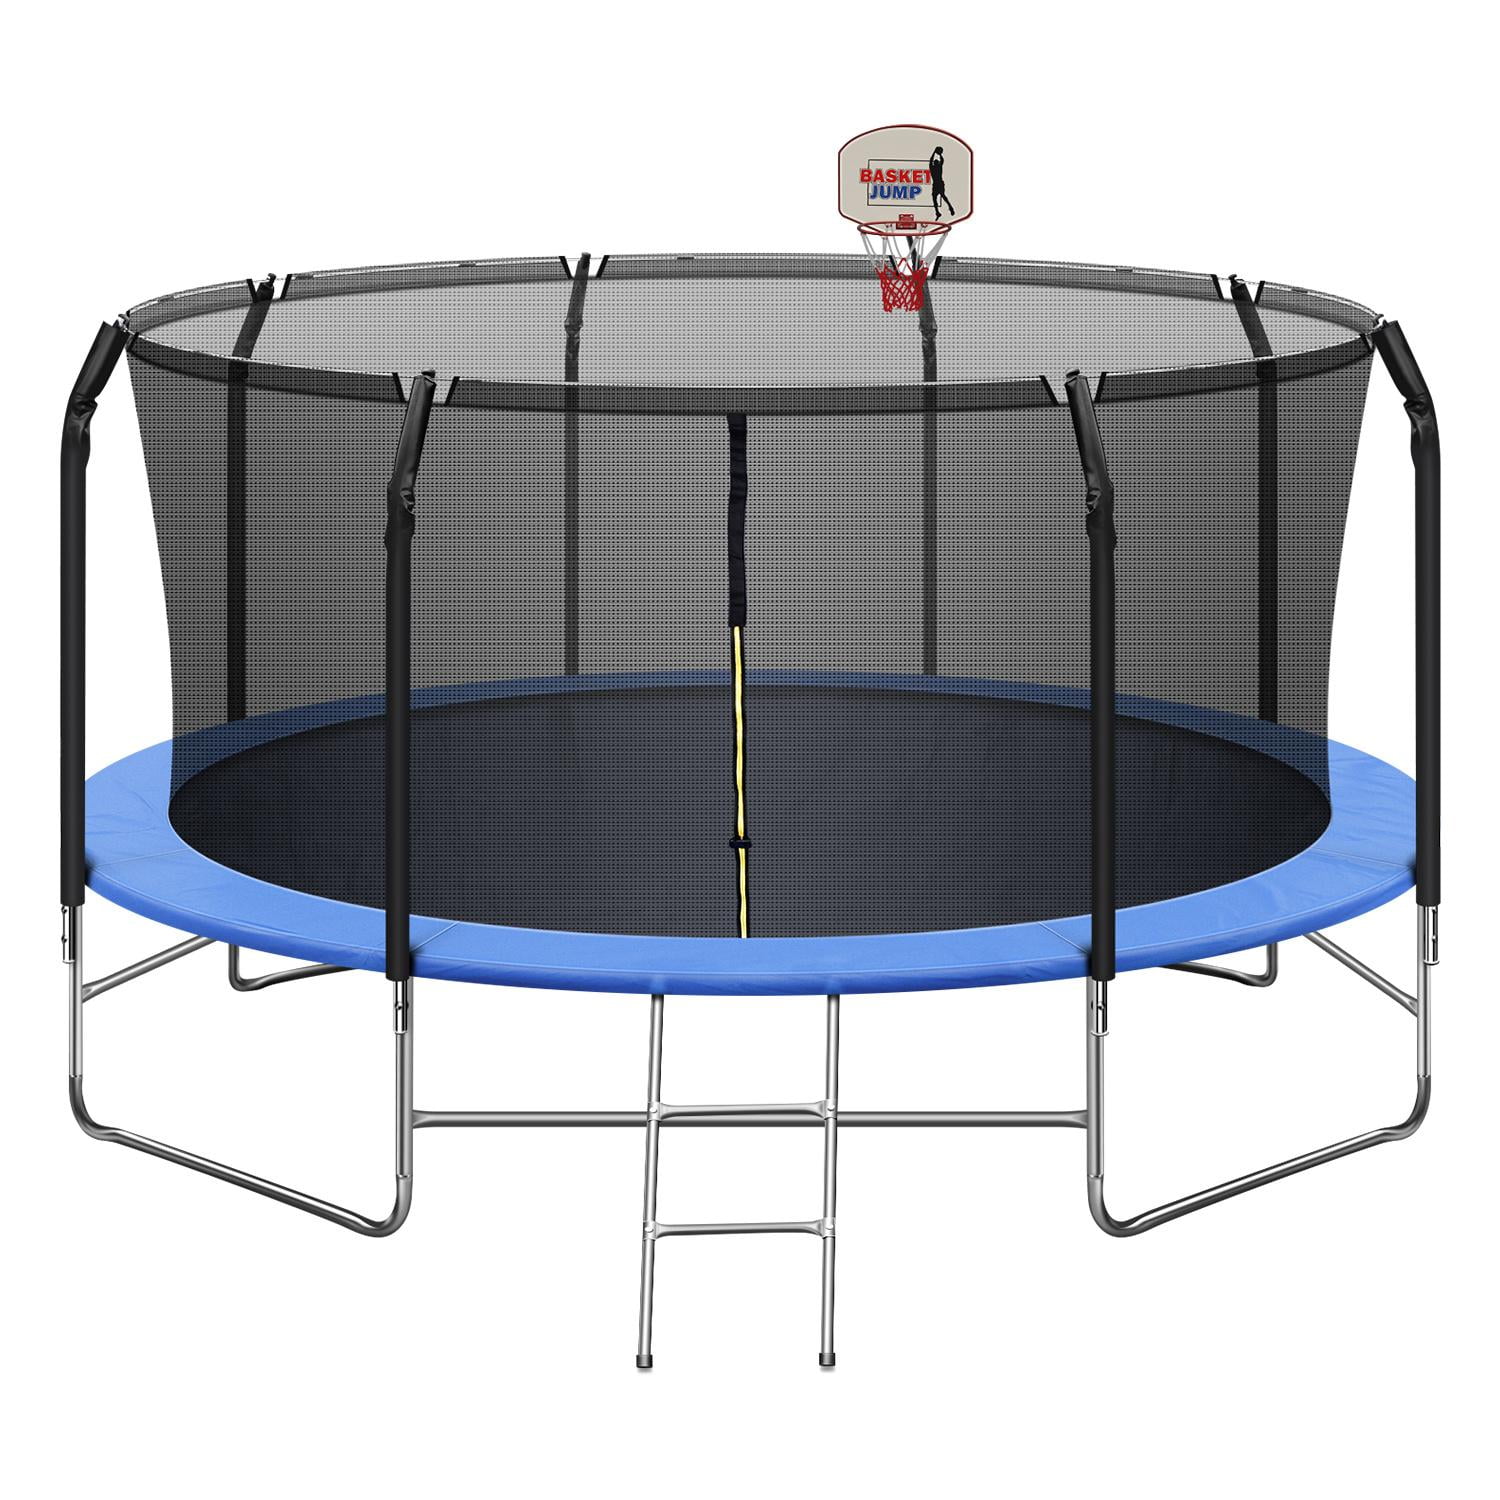 14ft Trampolines with Basketball Hoop and Ladder Enclosure Net for Kids Teens Adults, 800lbs Load for 4-5, Recreational Trampoline for Outdoor Garden Backyard, Blue